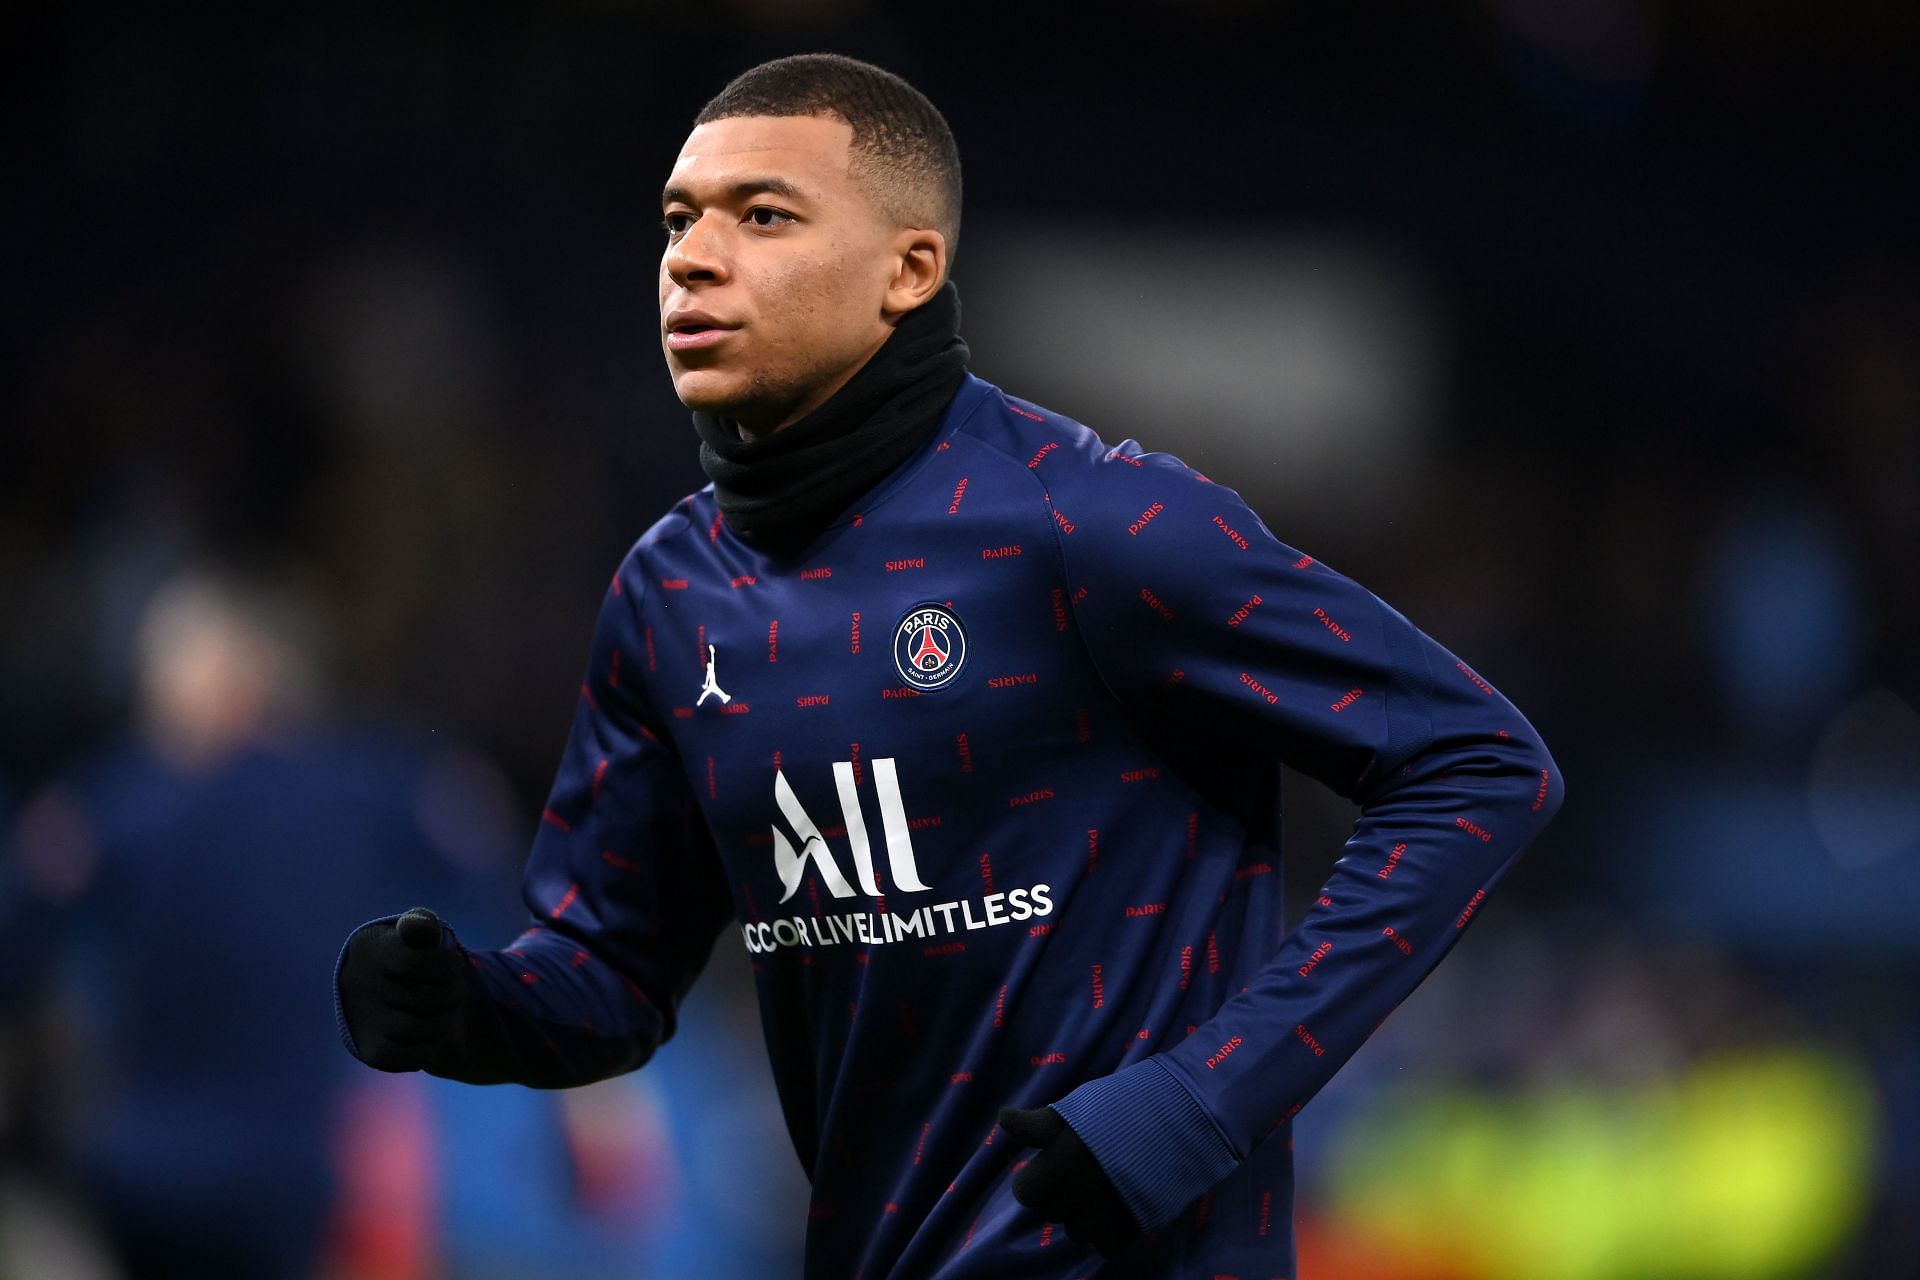 Mbappe has flourished in Ligue 1